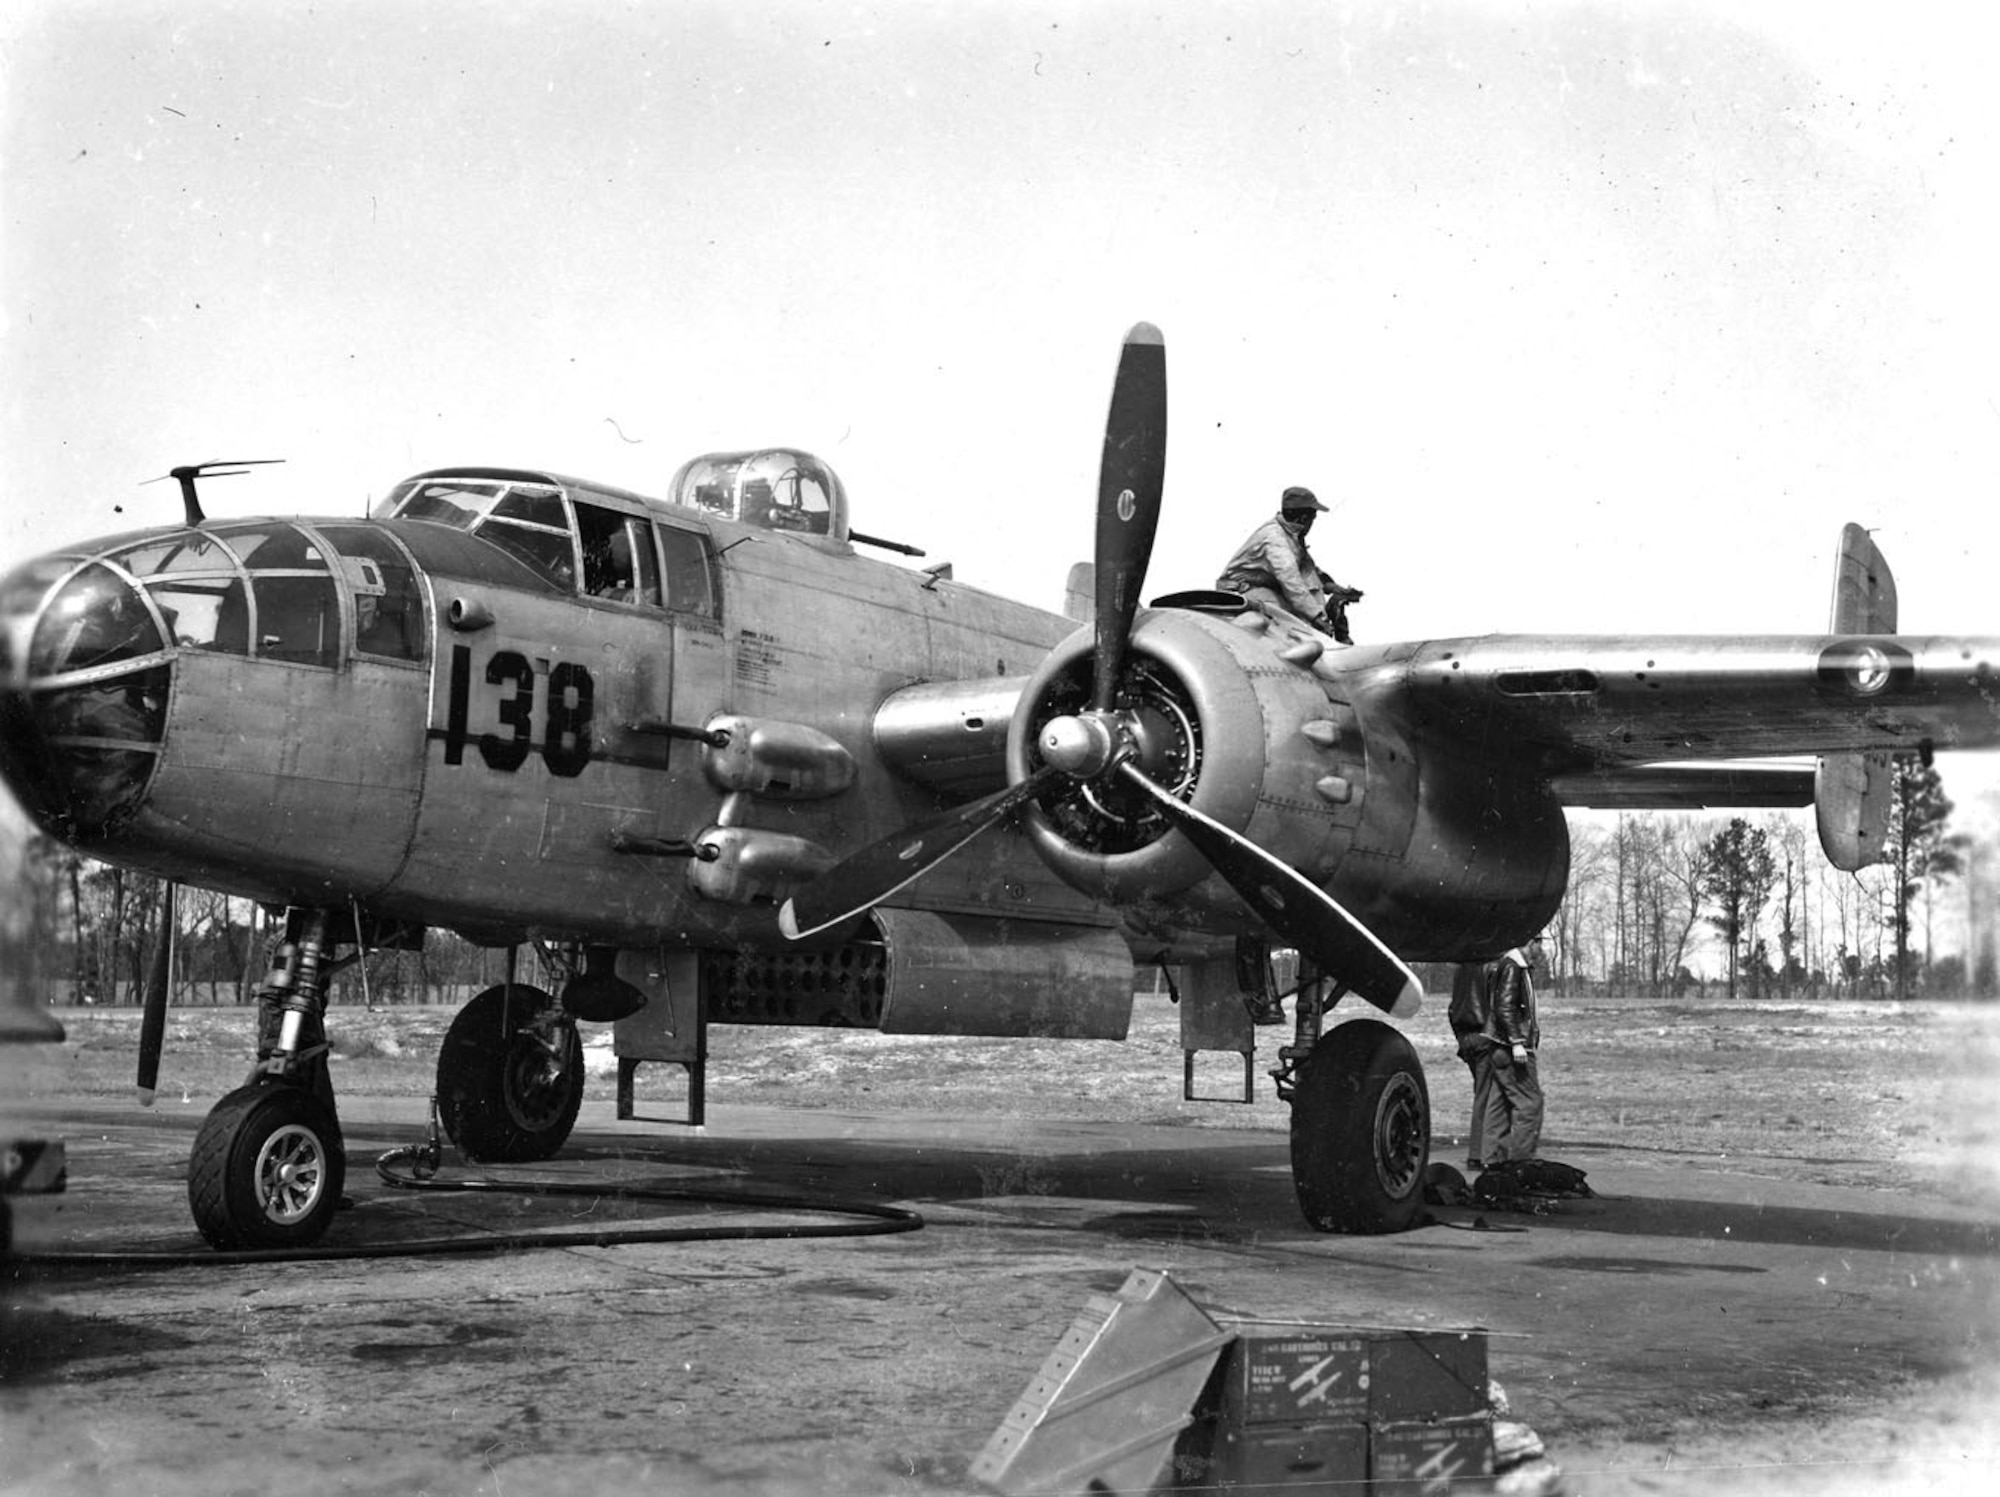 The 477th Medium Bombardment Group trained to fly B-25 Mitchell bombers, but the war ended before they saw action. (U.S. Air Force photo)